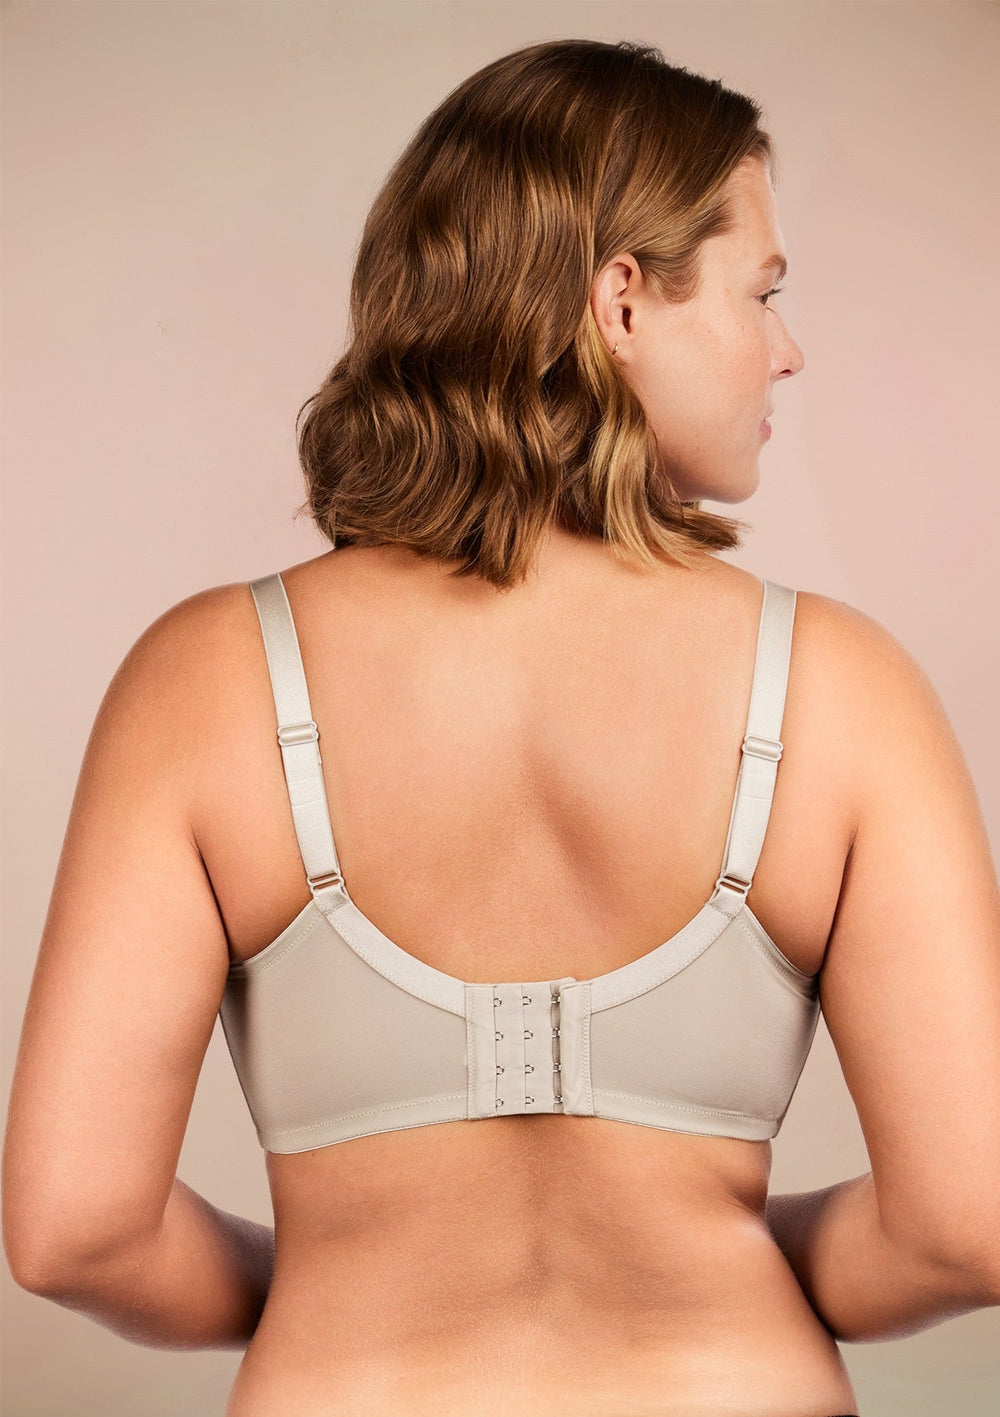 HSIA Vertical Lace Up Bra: Plus Size Back Smoothing Bra